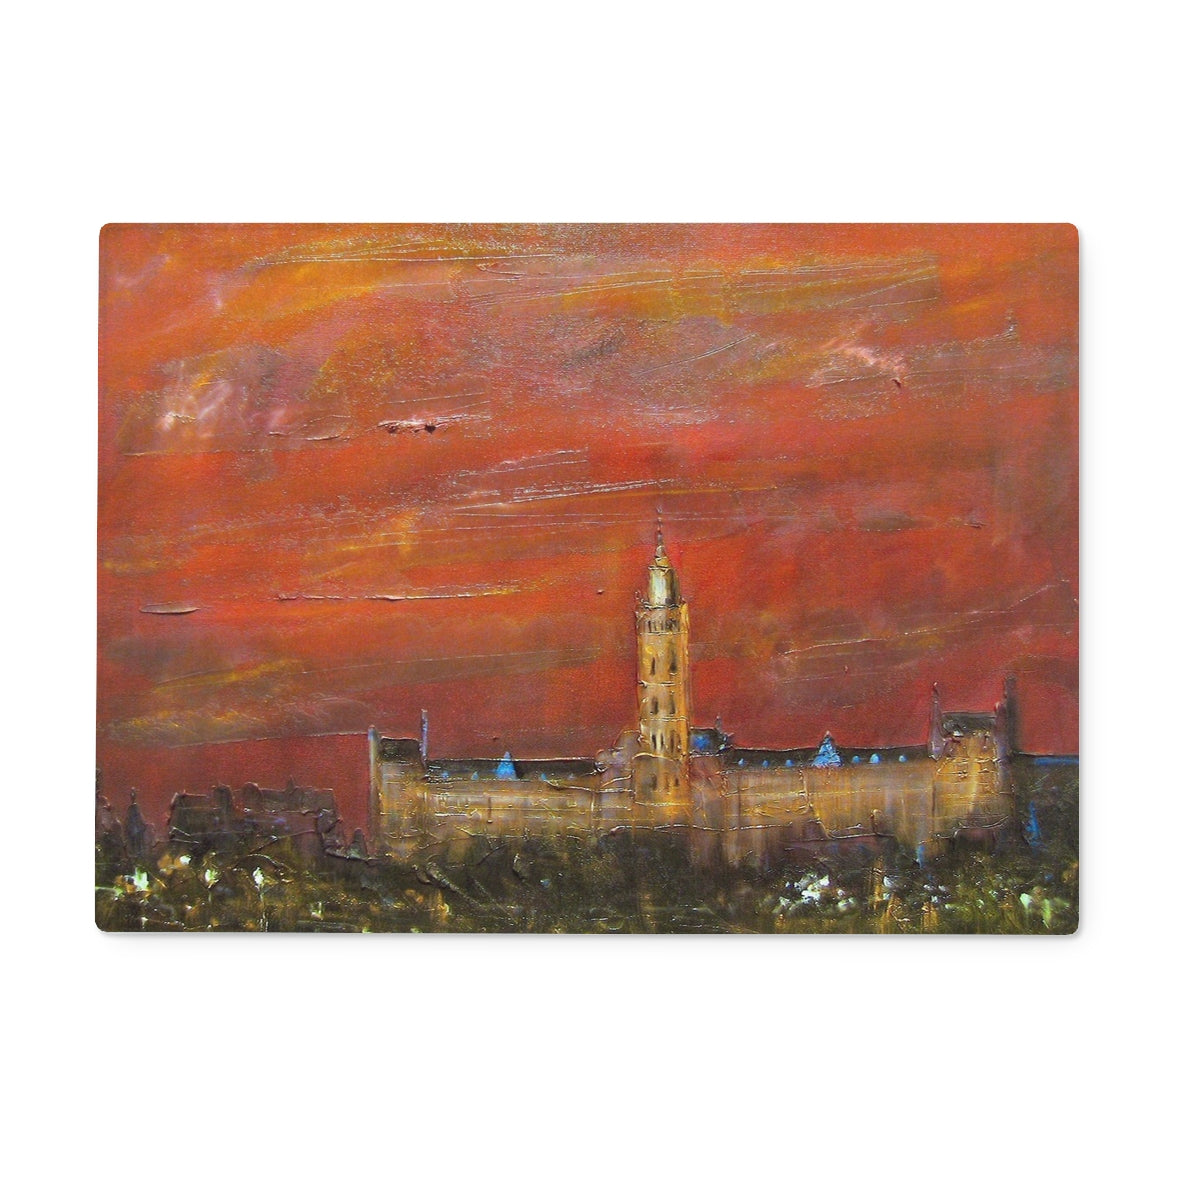 Glasgow University Dusk Art Gifts Glass Chopping Board-Glass Chopping Boards-Edinburgh & Glasgow Art Gallery-15"x11" Rectangular-Paintings, Prints, Homeware, Art Gifts From Scotland By Scottish Artist Kevin Hunter